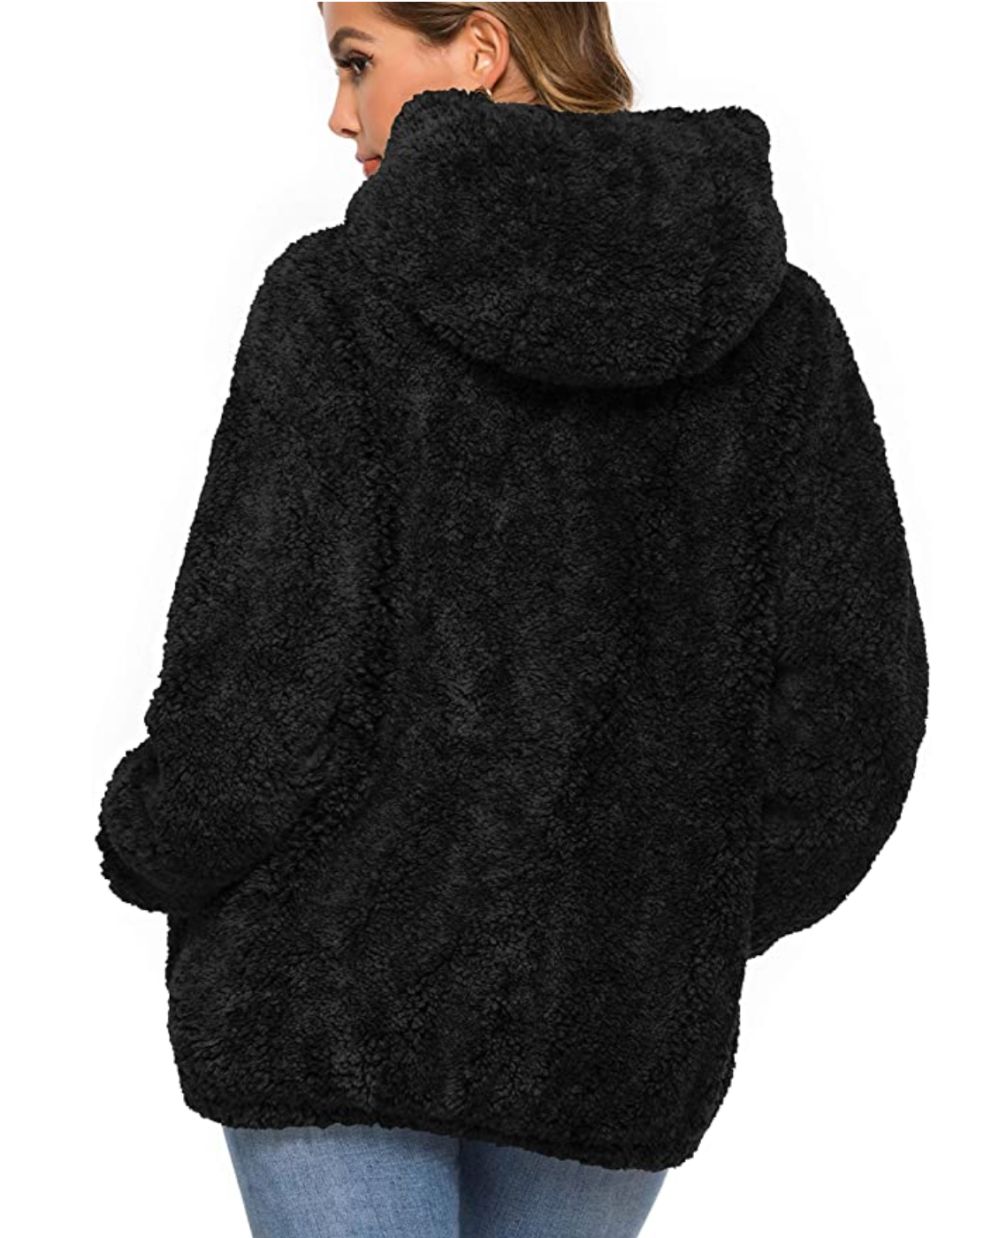 ANRABESS Women's Fashion Hooded Zip Up Faux Shearling Shaggy Oversized Coat